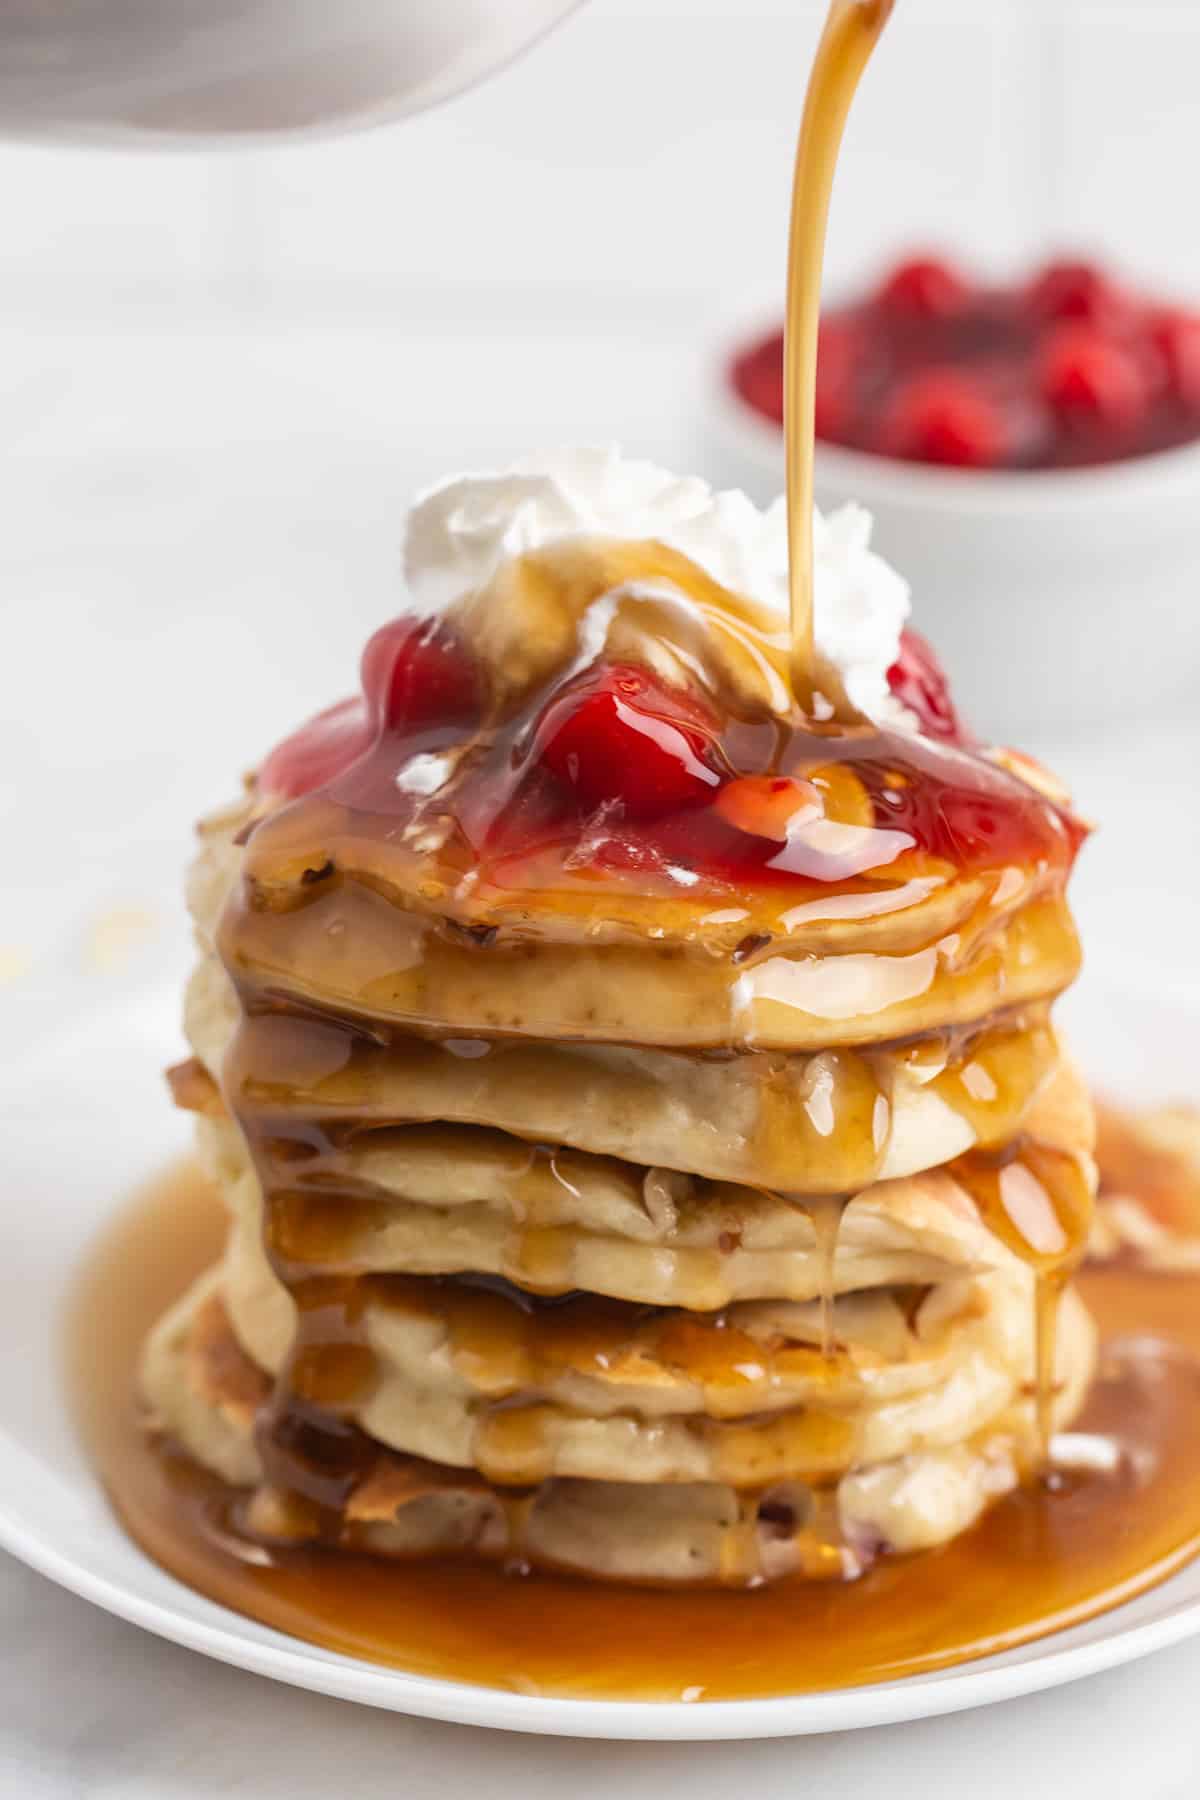 Syrup being poured on a tall stack of pancakes topped with cherry pie filling.